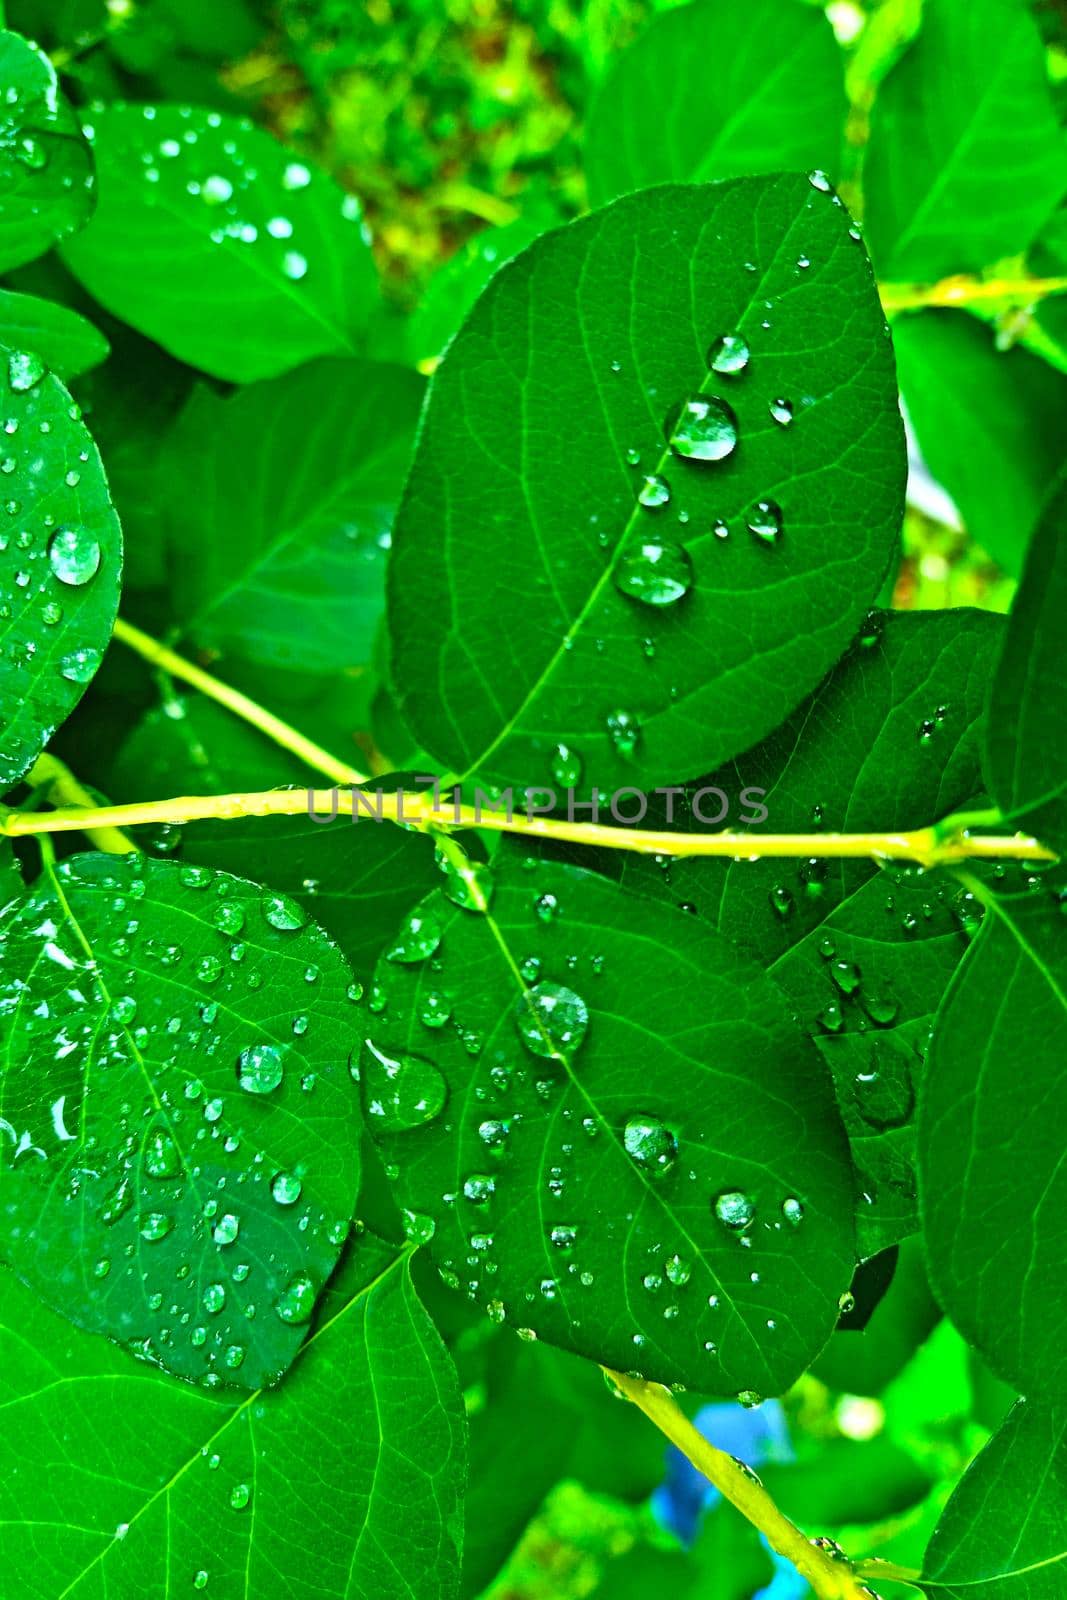 On the green leaves of a bush or tree are raindrops. by kip02kas